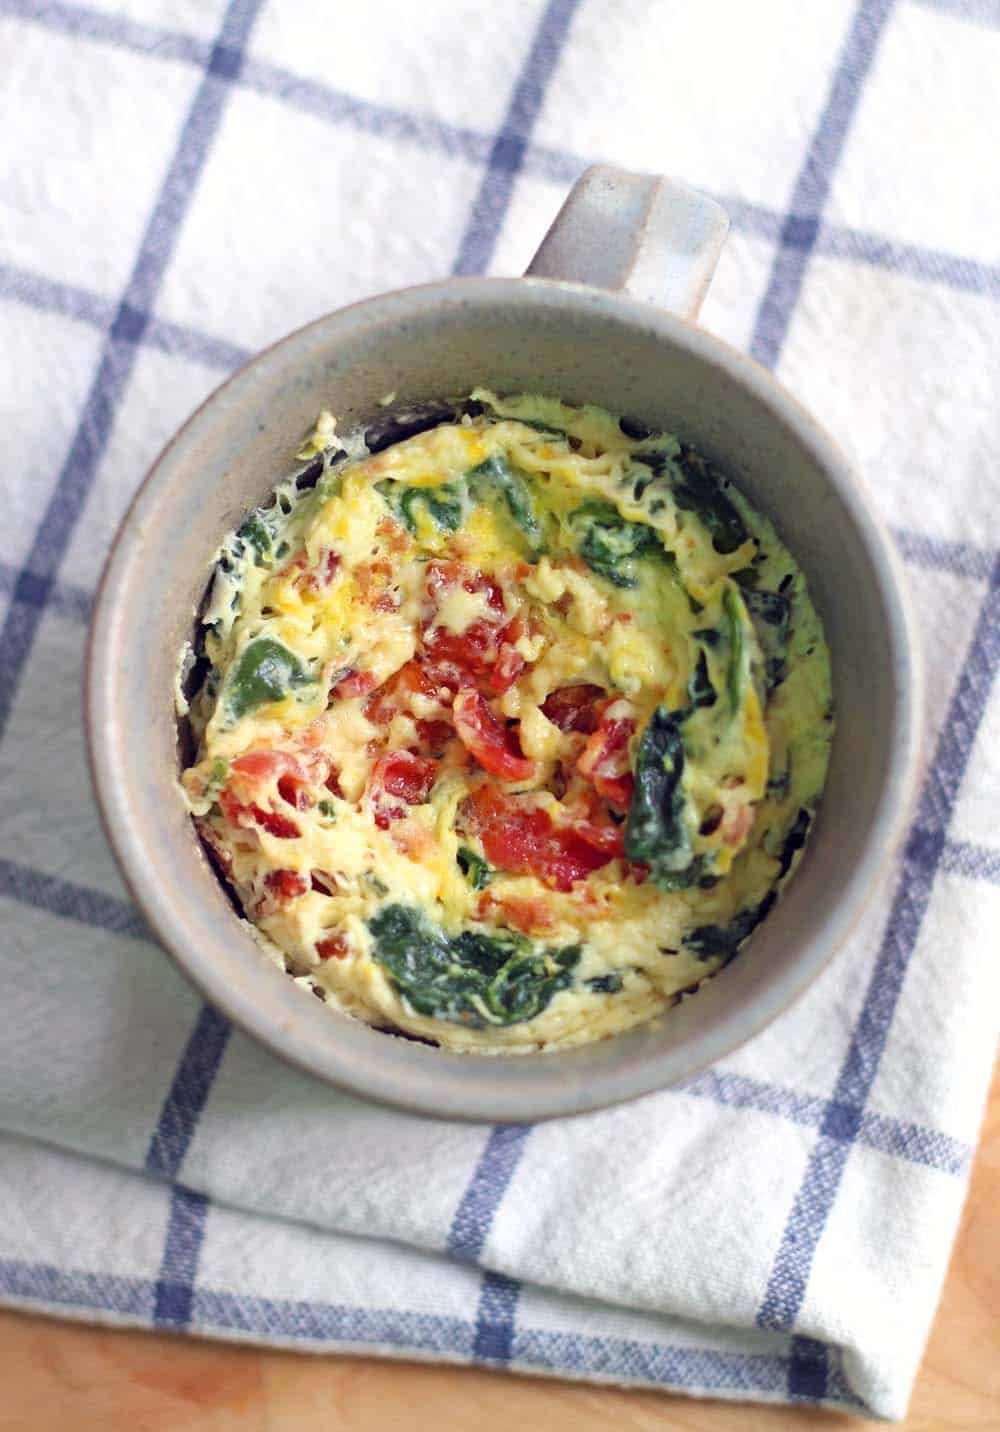 Bird's eye view of spinach and cheddar microwave quiche in a mug, which rests on a blue and white checkered cloth.